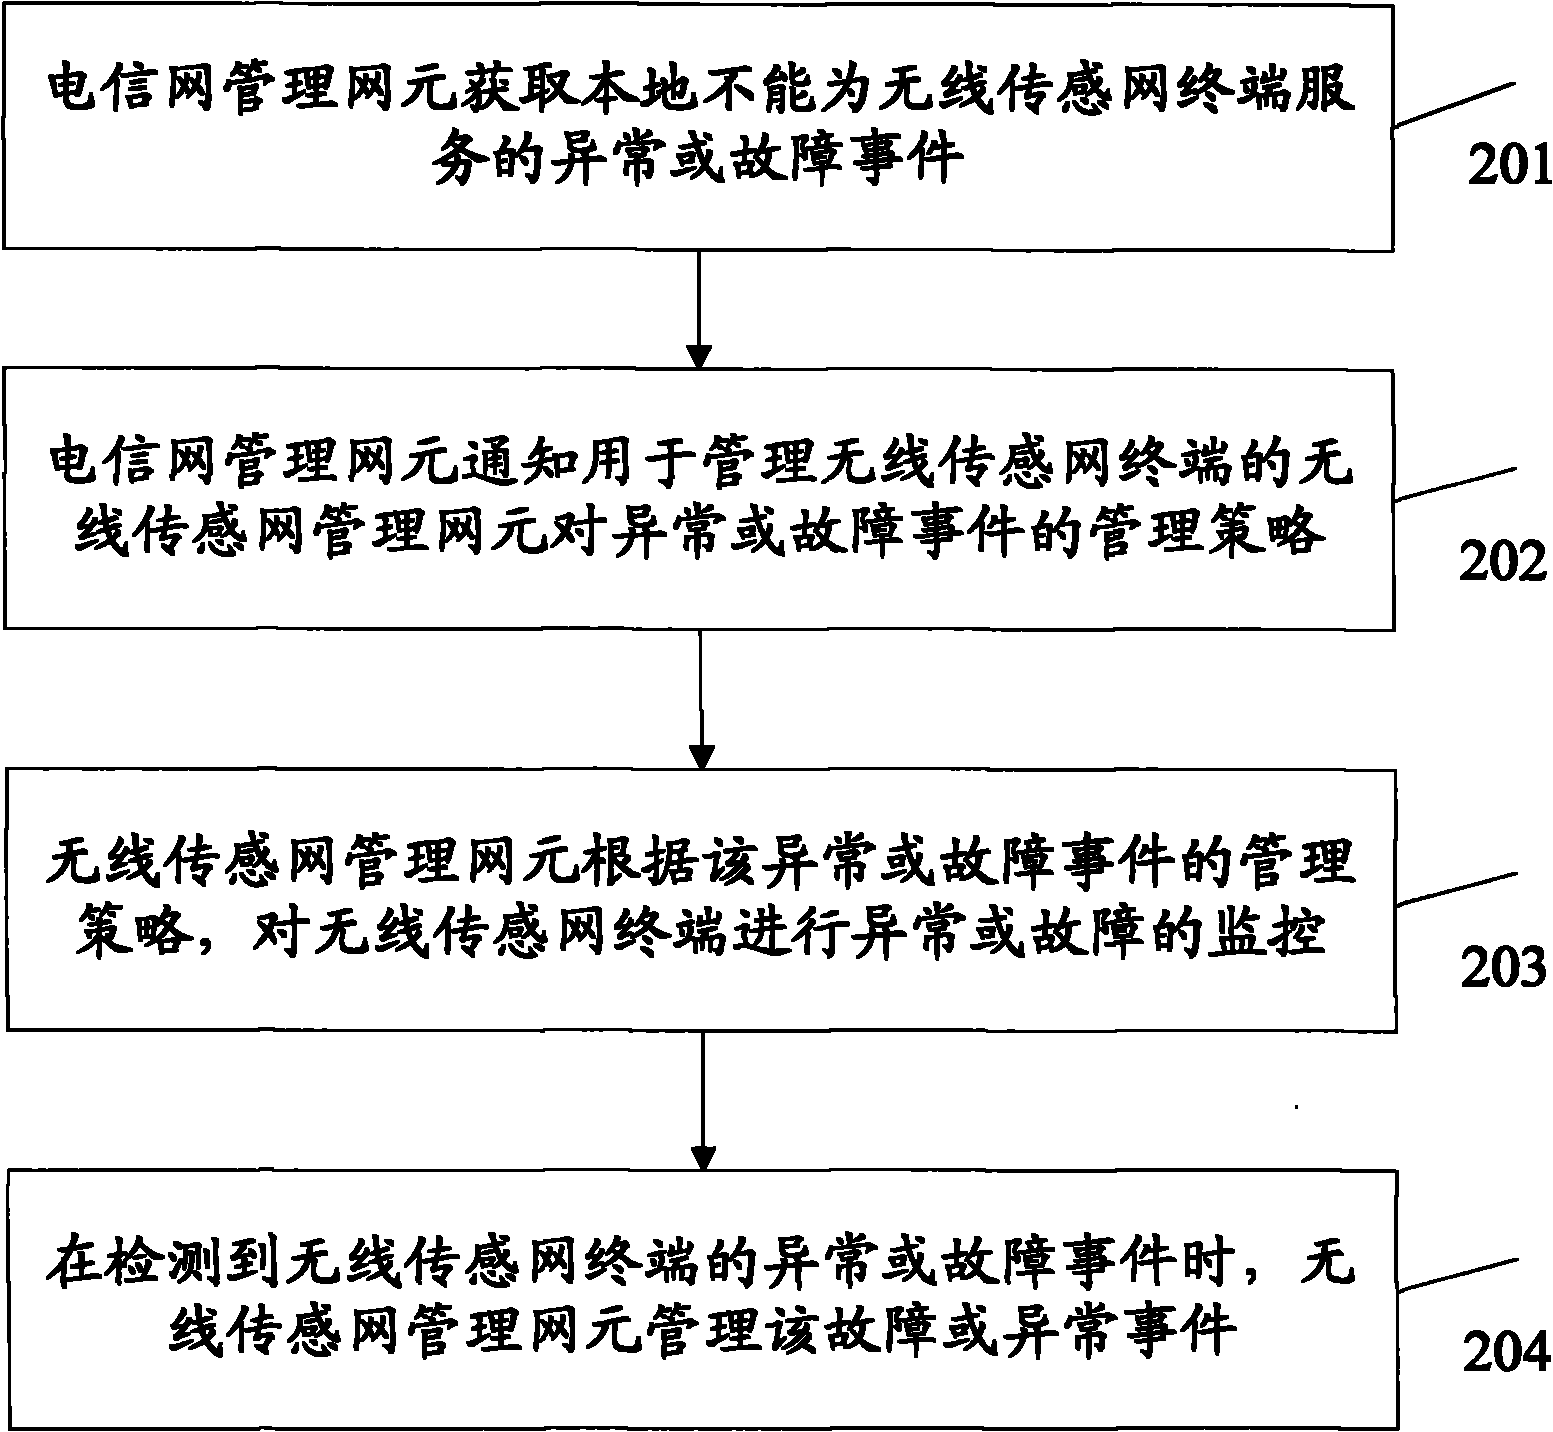 Method and system for managing wireless sensing network terminal